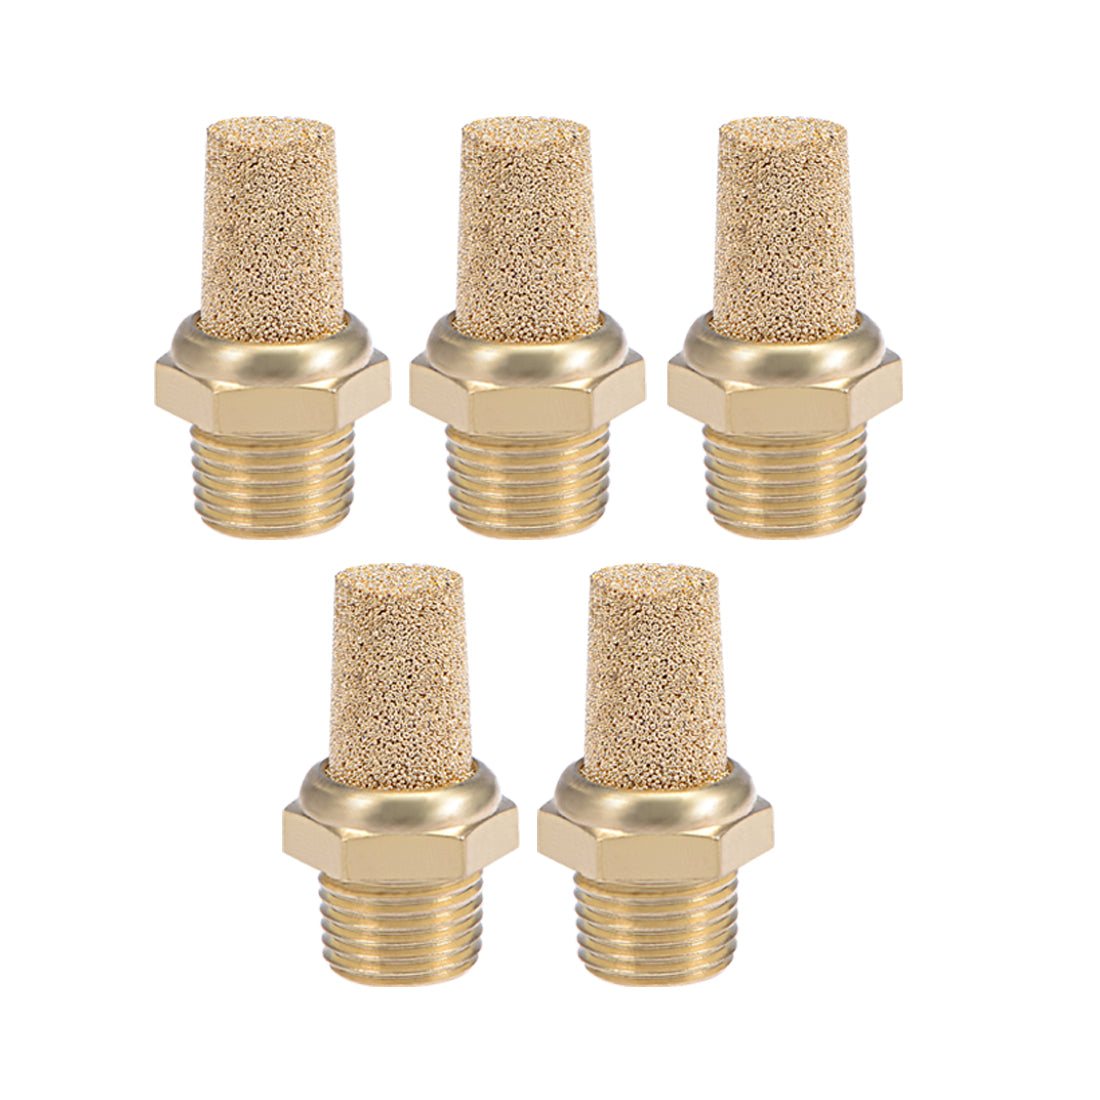 uxcell Uxcell 1/8 PT Sintered Bronze Exhaust Muffler with Brass Body Protruding 5pcs